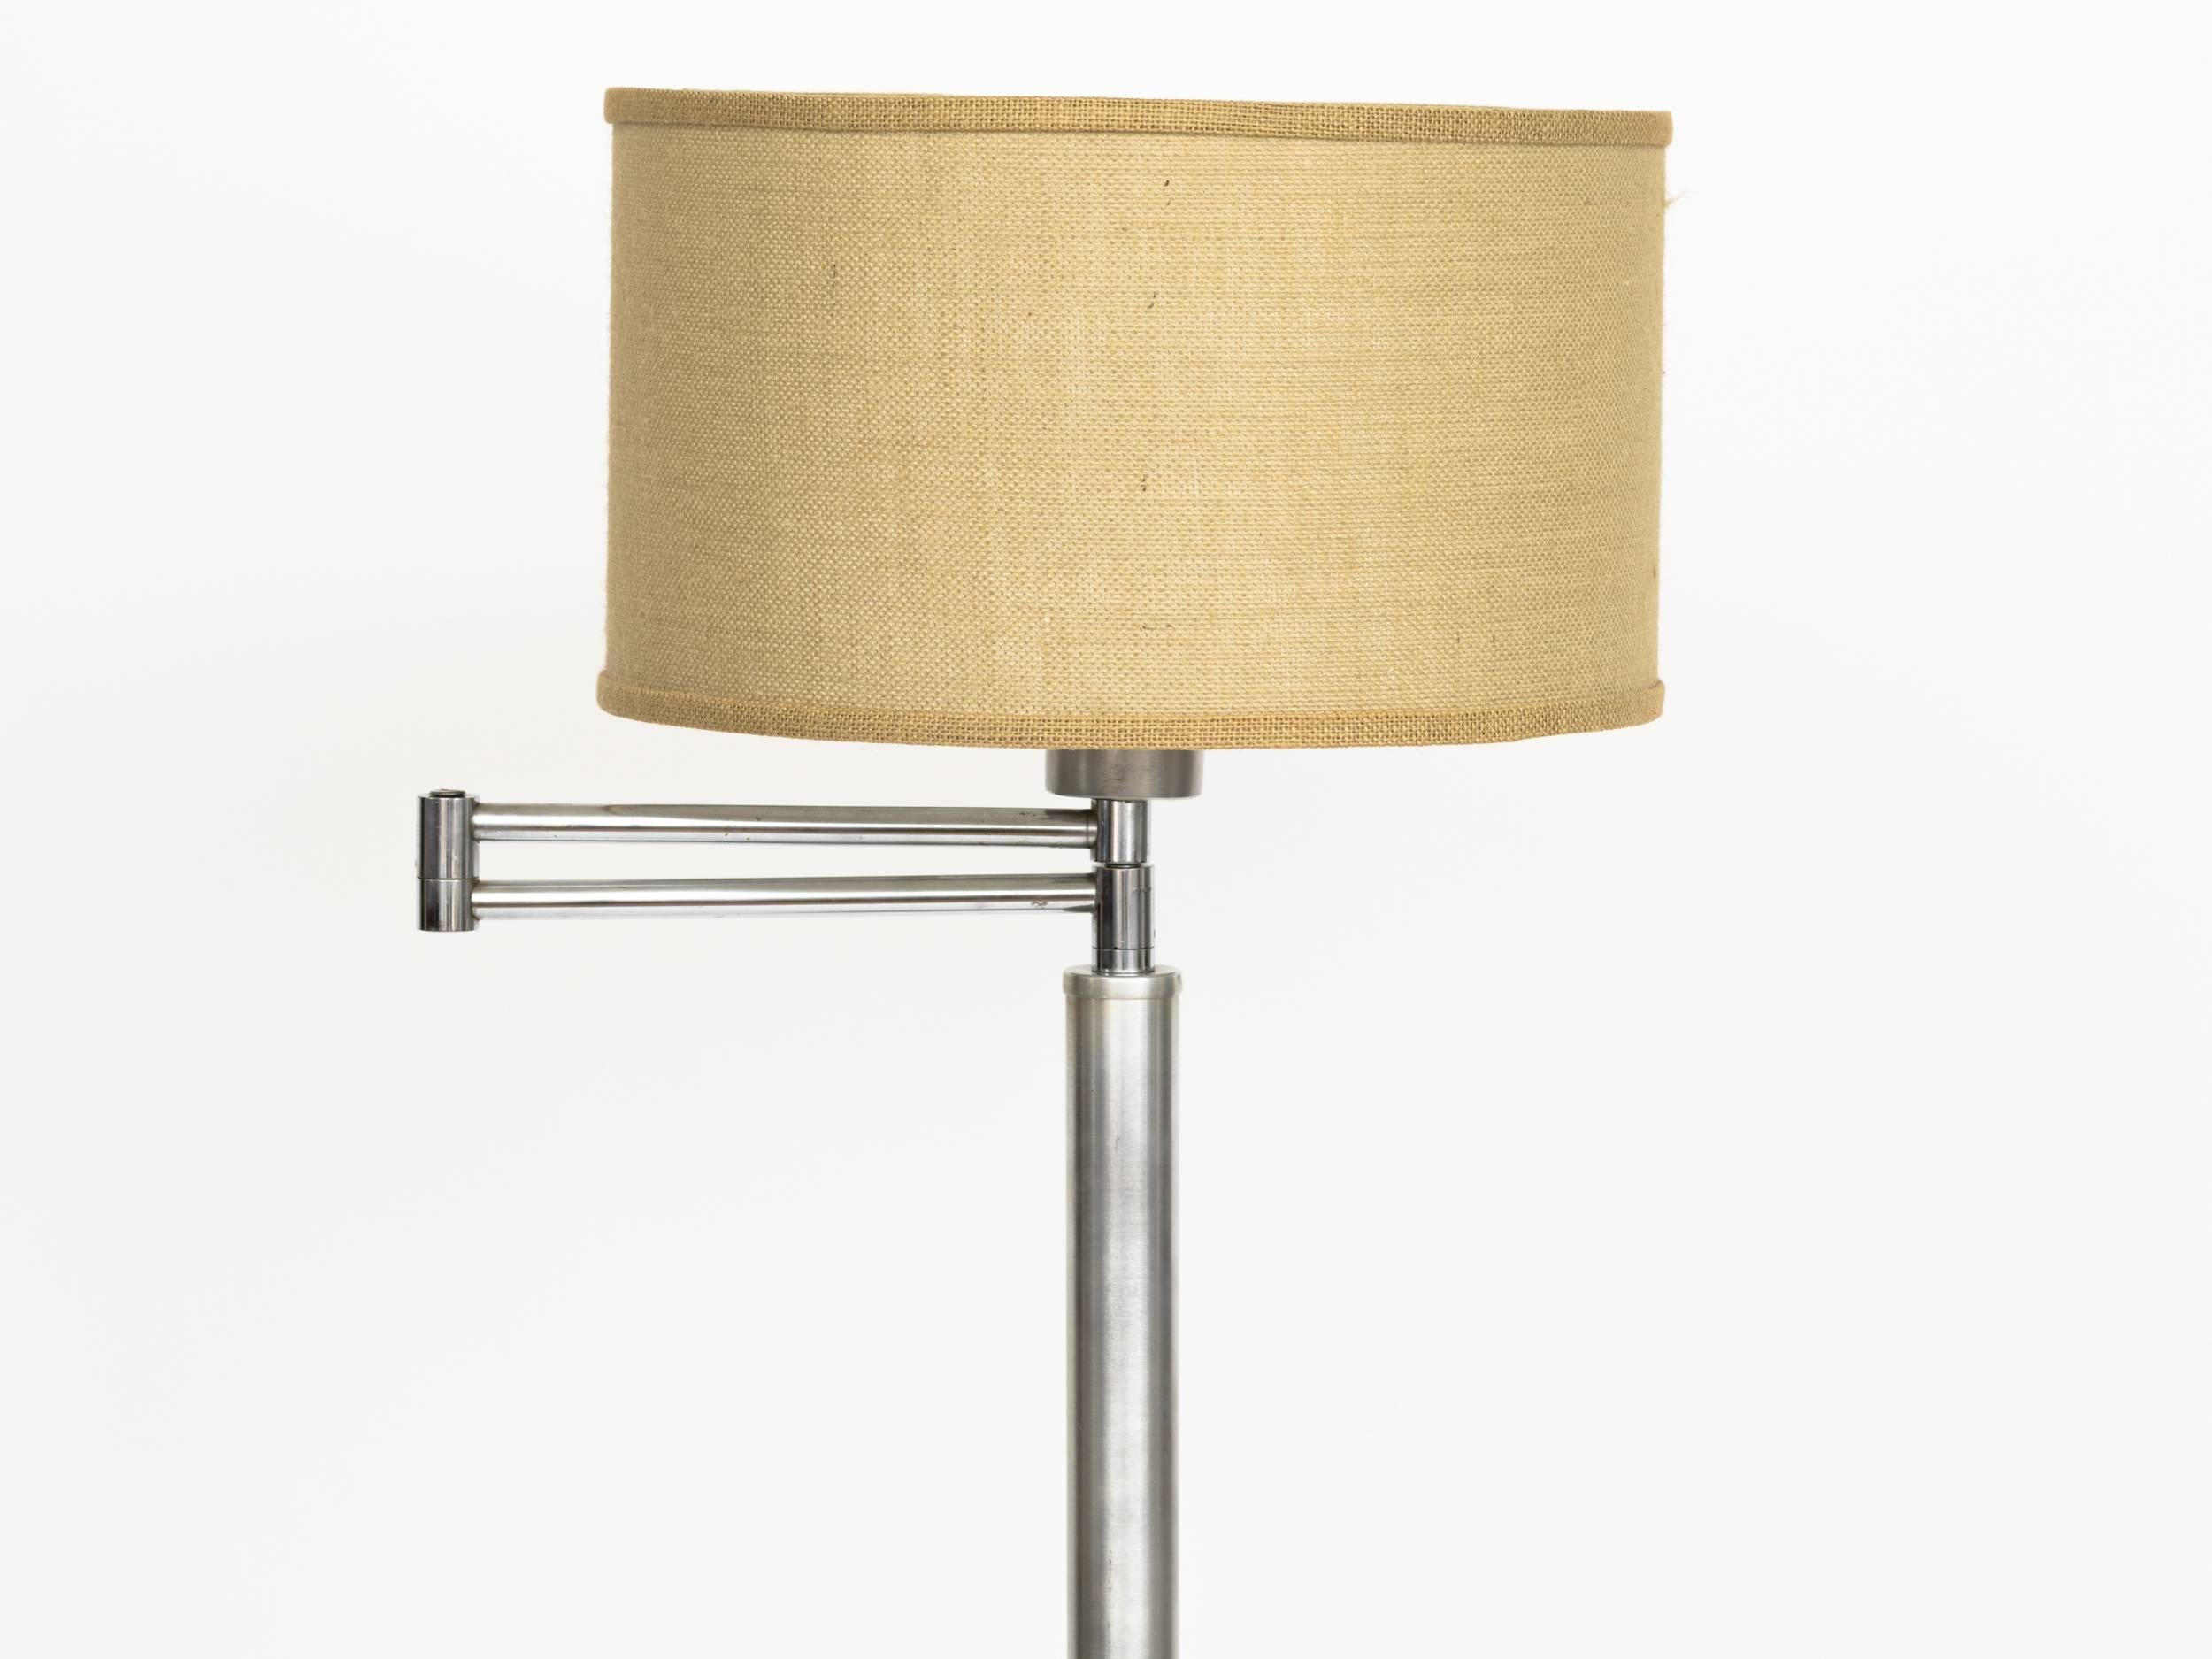 Machine Age brushed aluminium adjustable swing arm floor lamp with milk glass shade diffuser.  
Lamp shade not included.